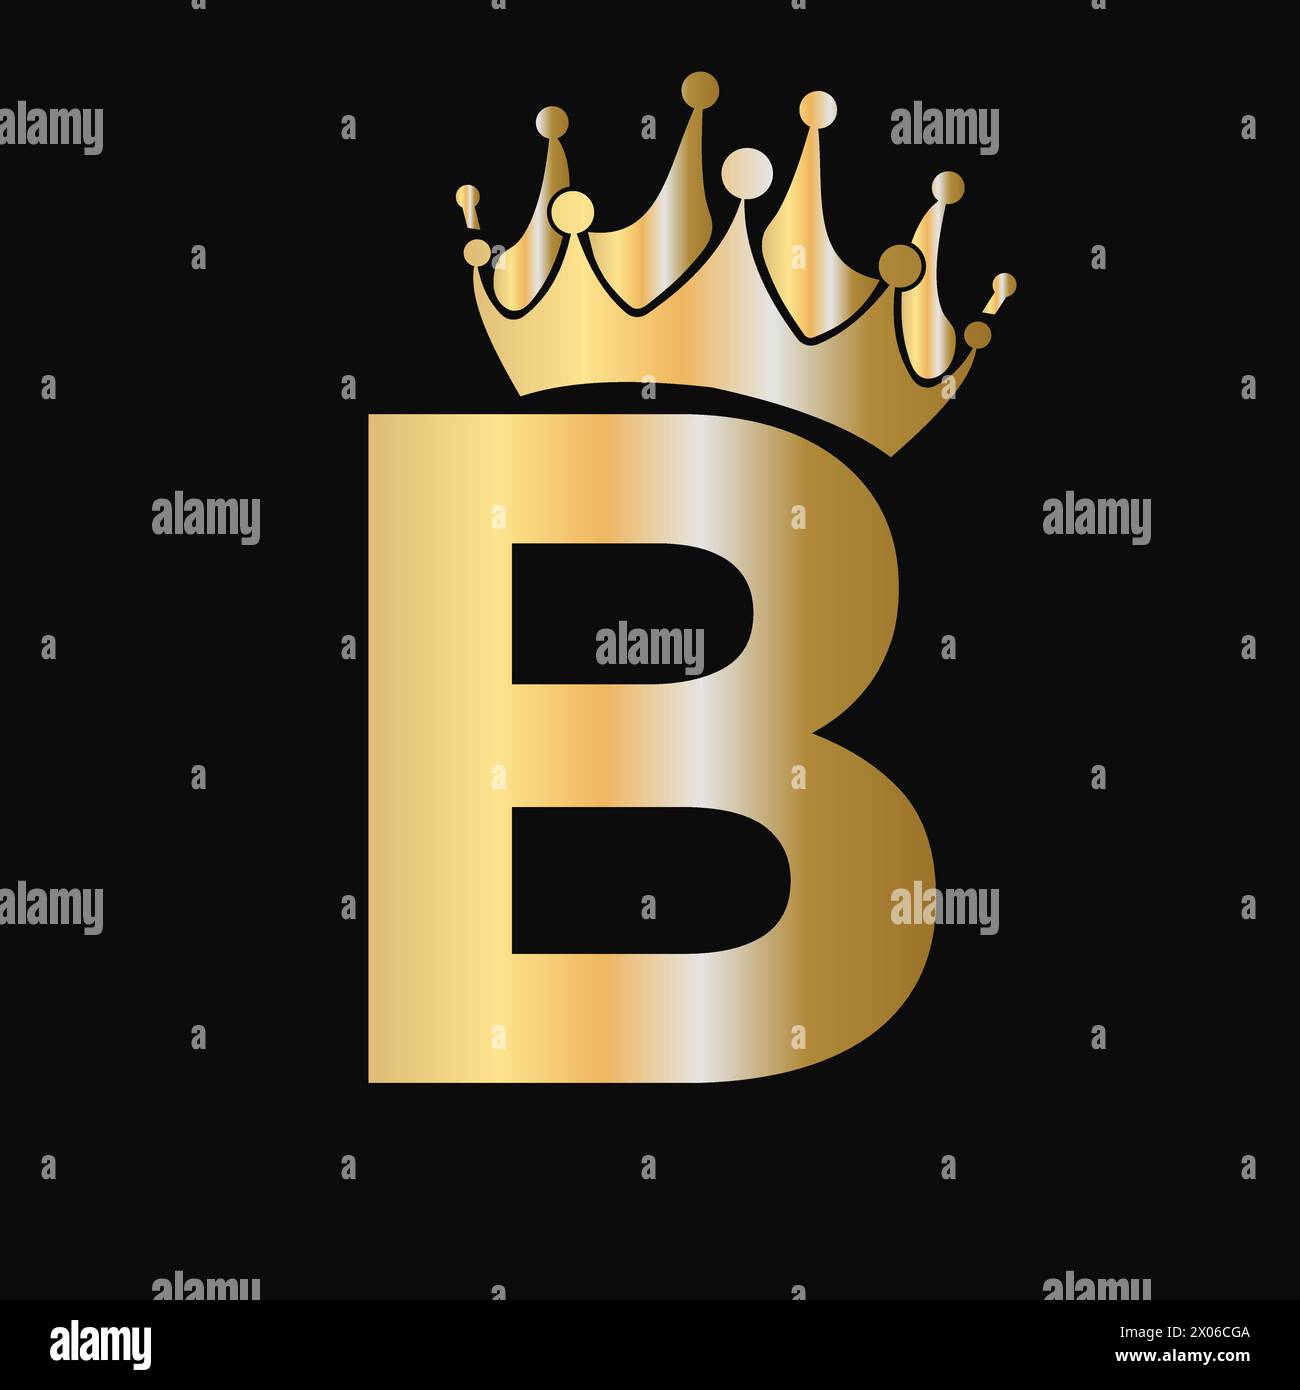 Letter B Crown Logo Template. Royal Crown Logotype Luxury Sign  for Beauty, Fashion, Star, Elegant Symbol Stock Vector